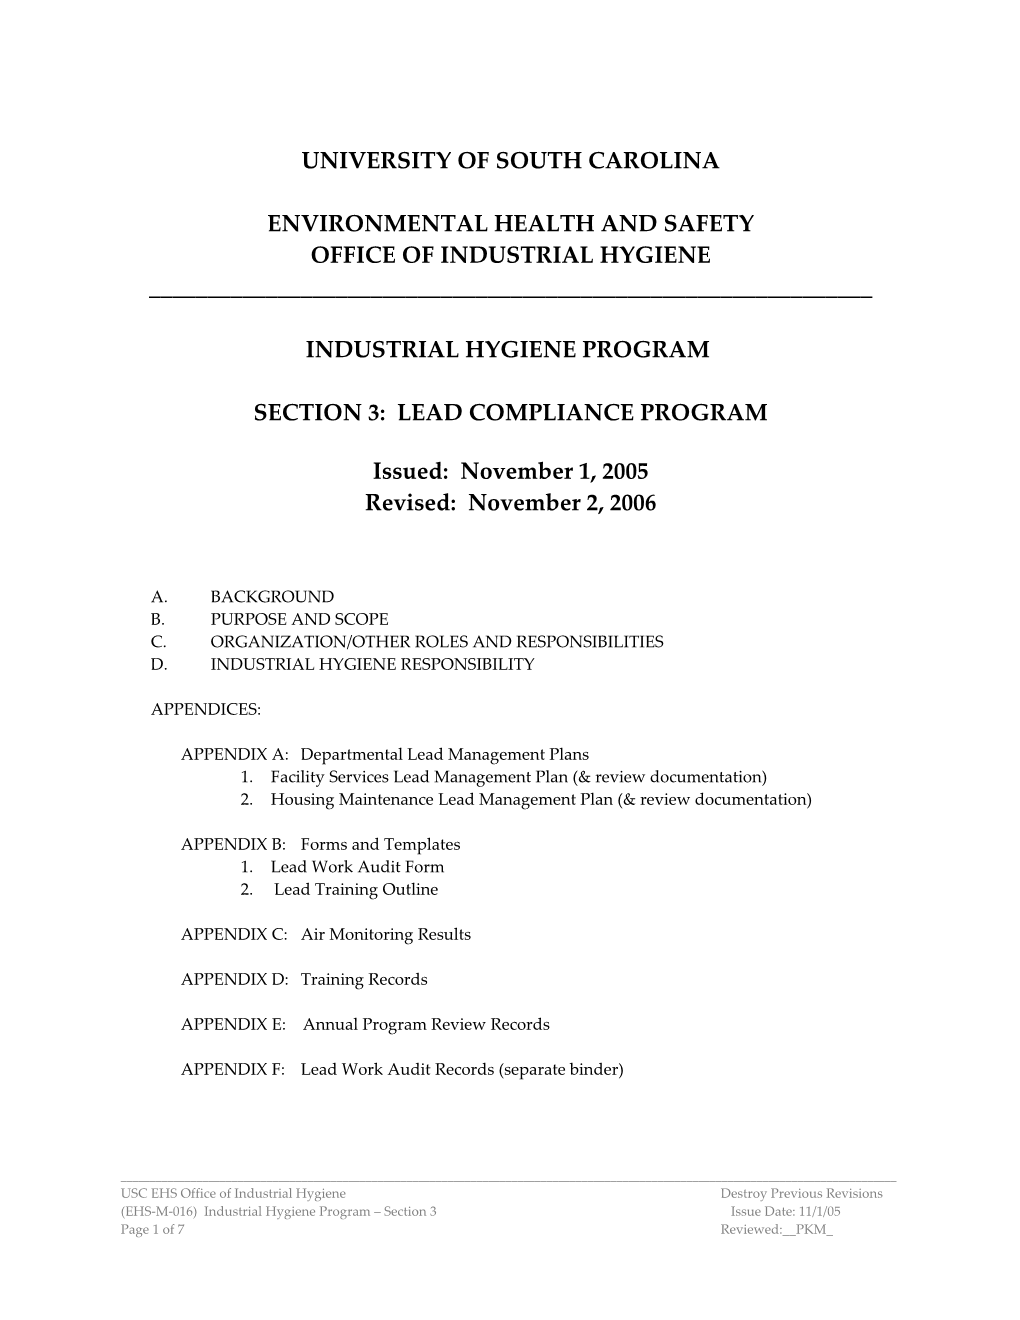 This Document Establishes Policies and Procedures Related to EHS Involvement with Asbestos